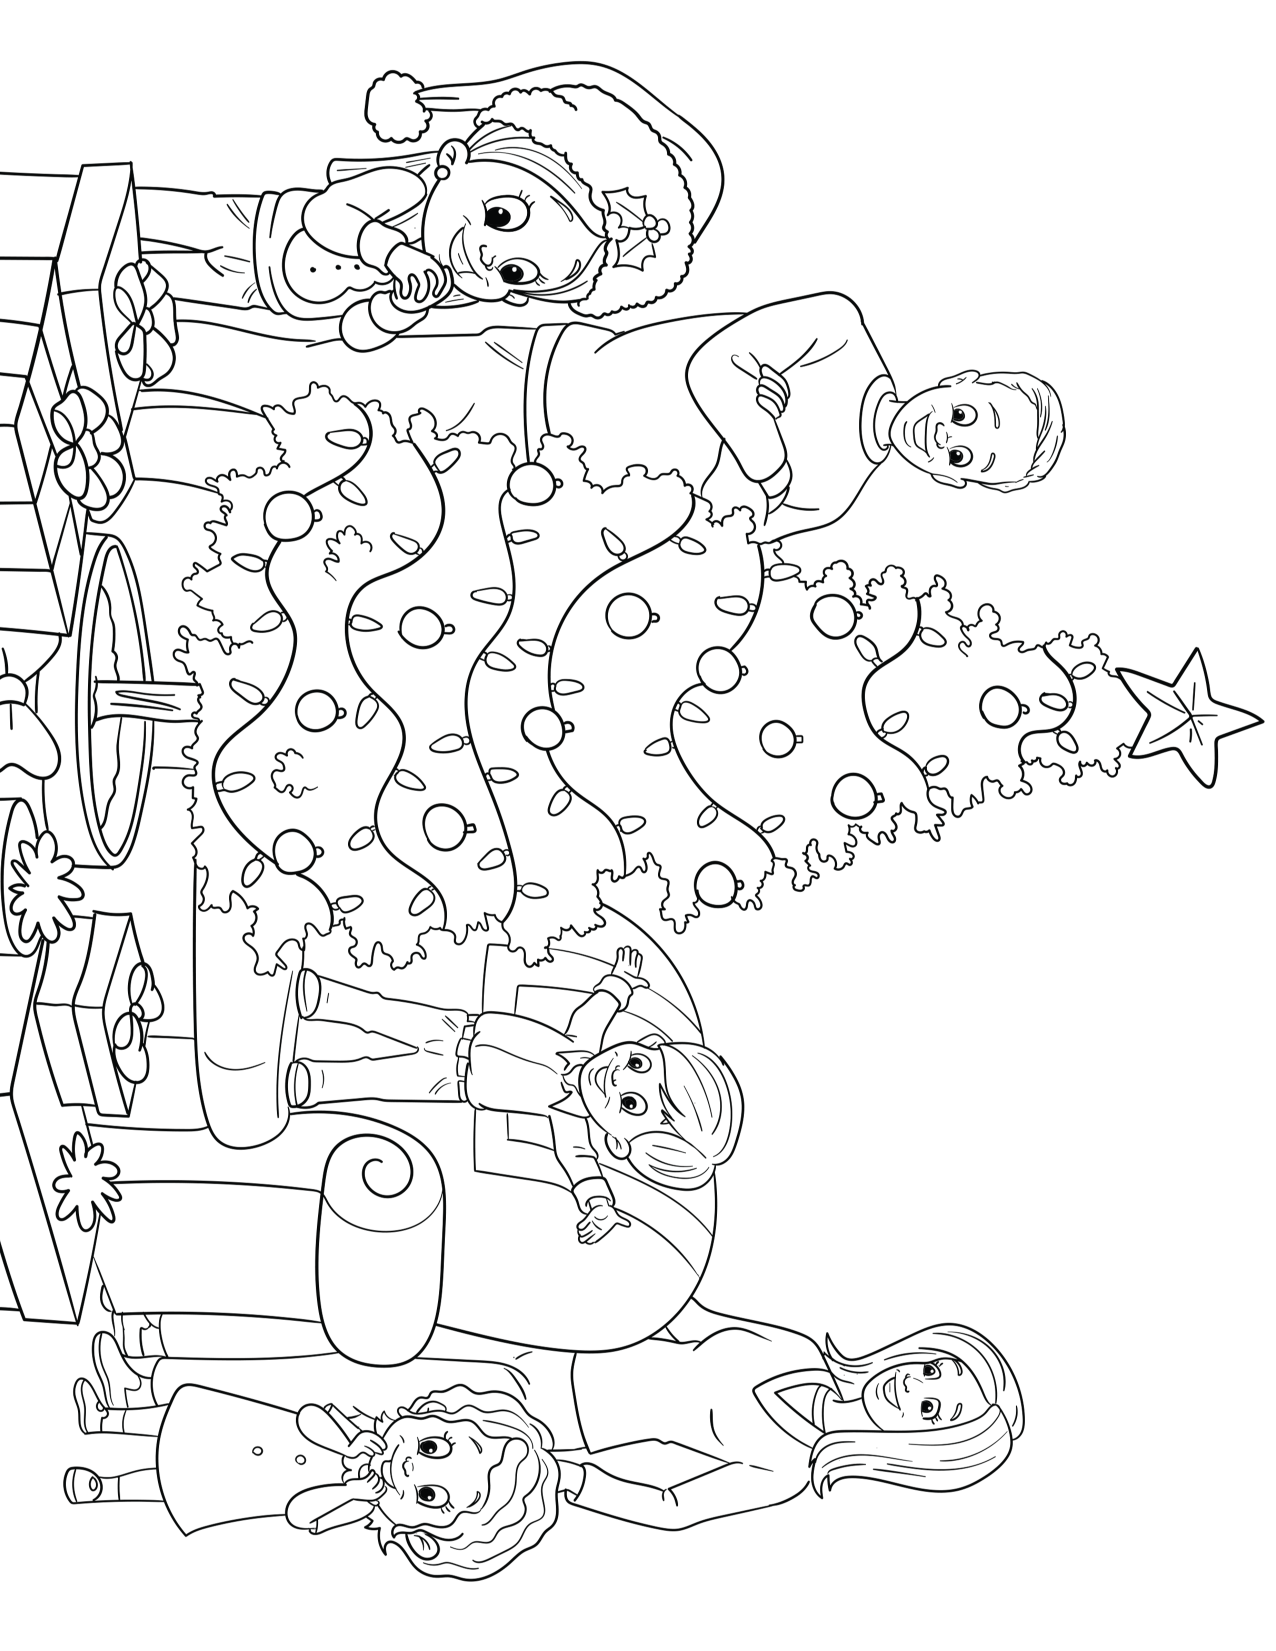 Holly Holiday Downloadable Coloring Pages